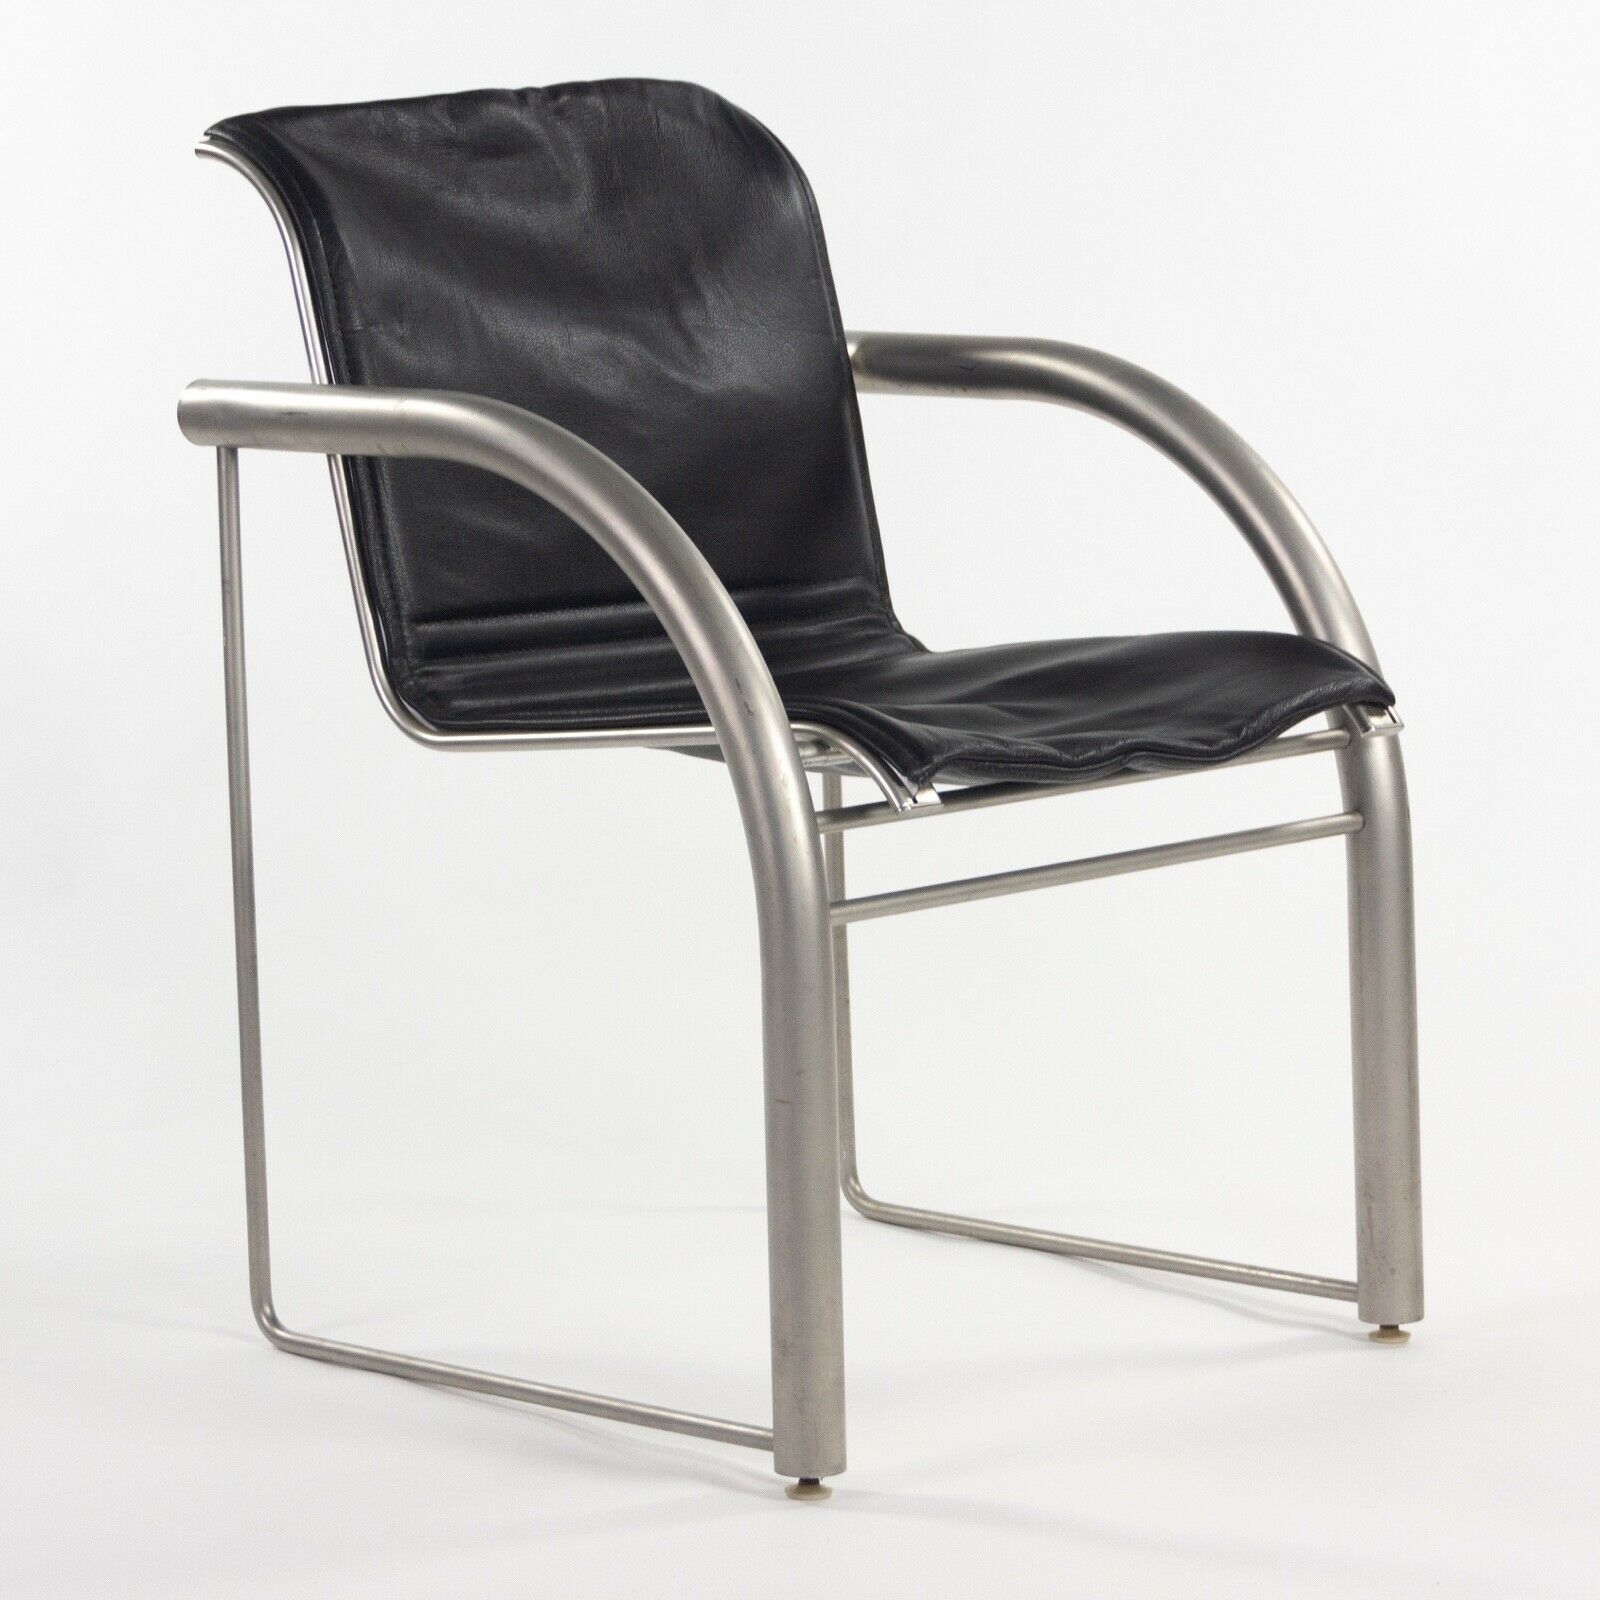 Prototype Richard Schultz 2002 Collection Stainless & Leather Dining Chair